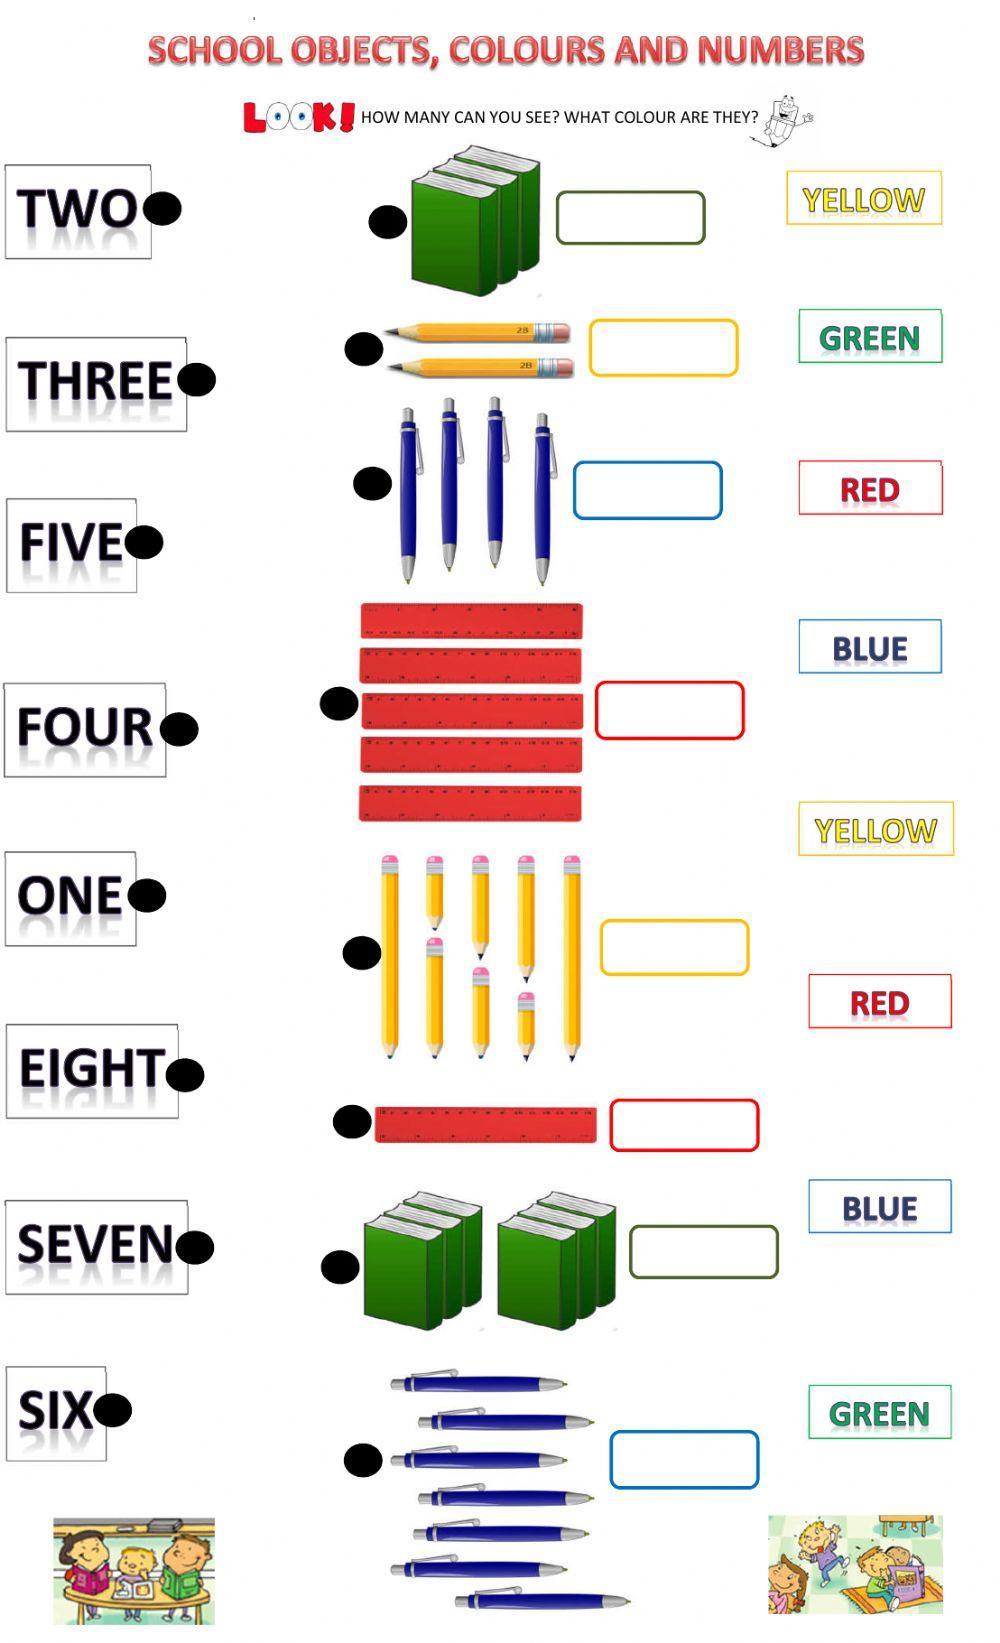 School objects colours and numbers